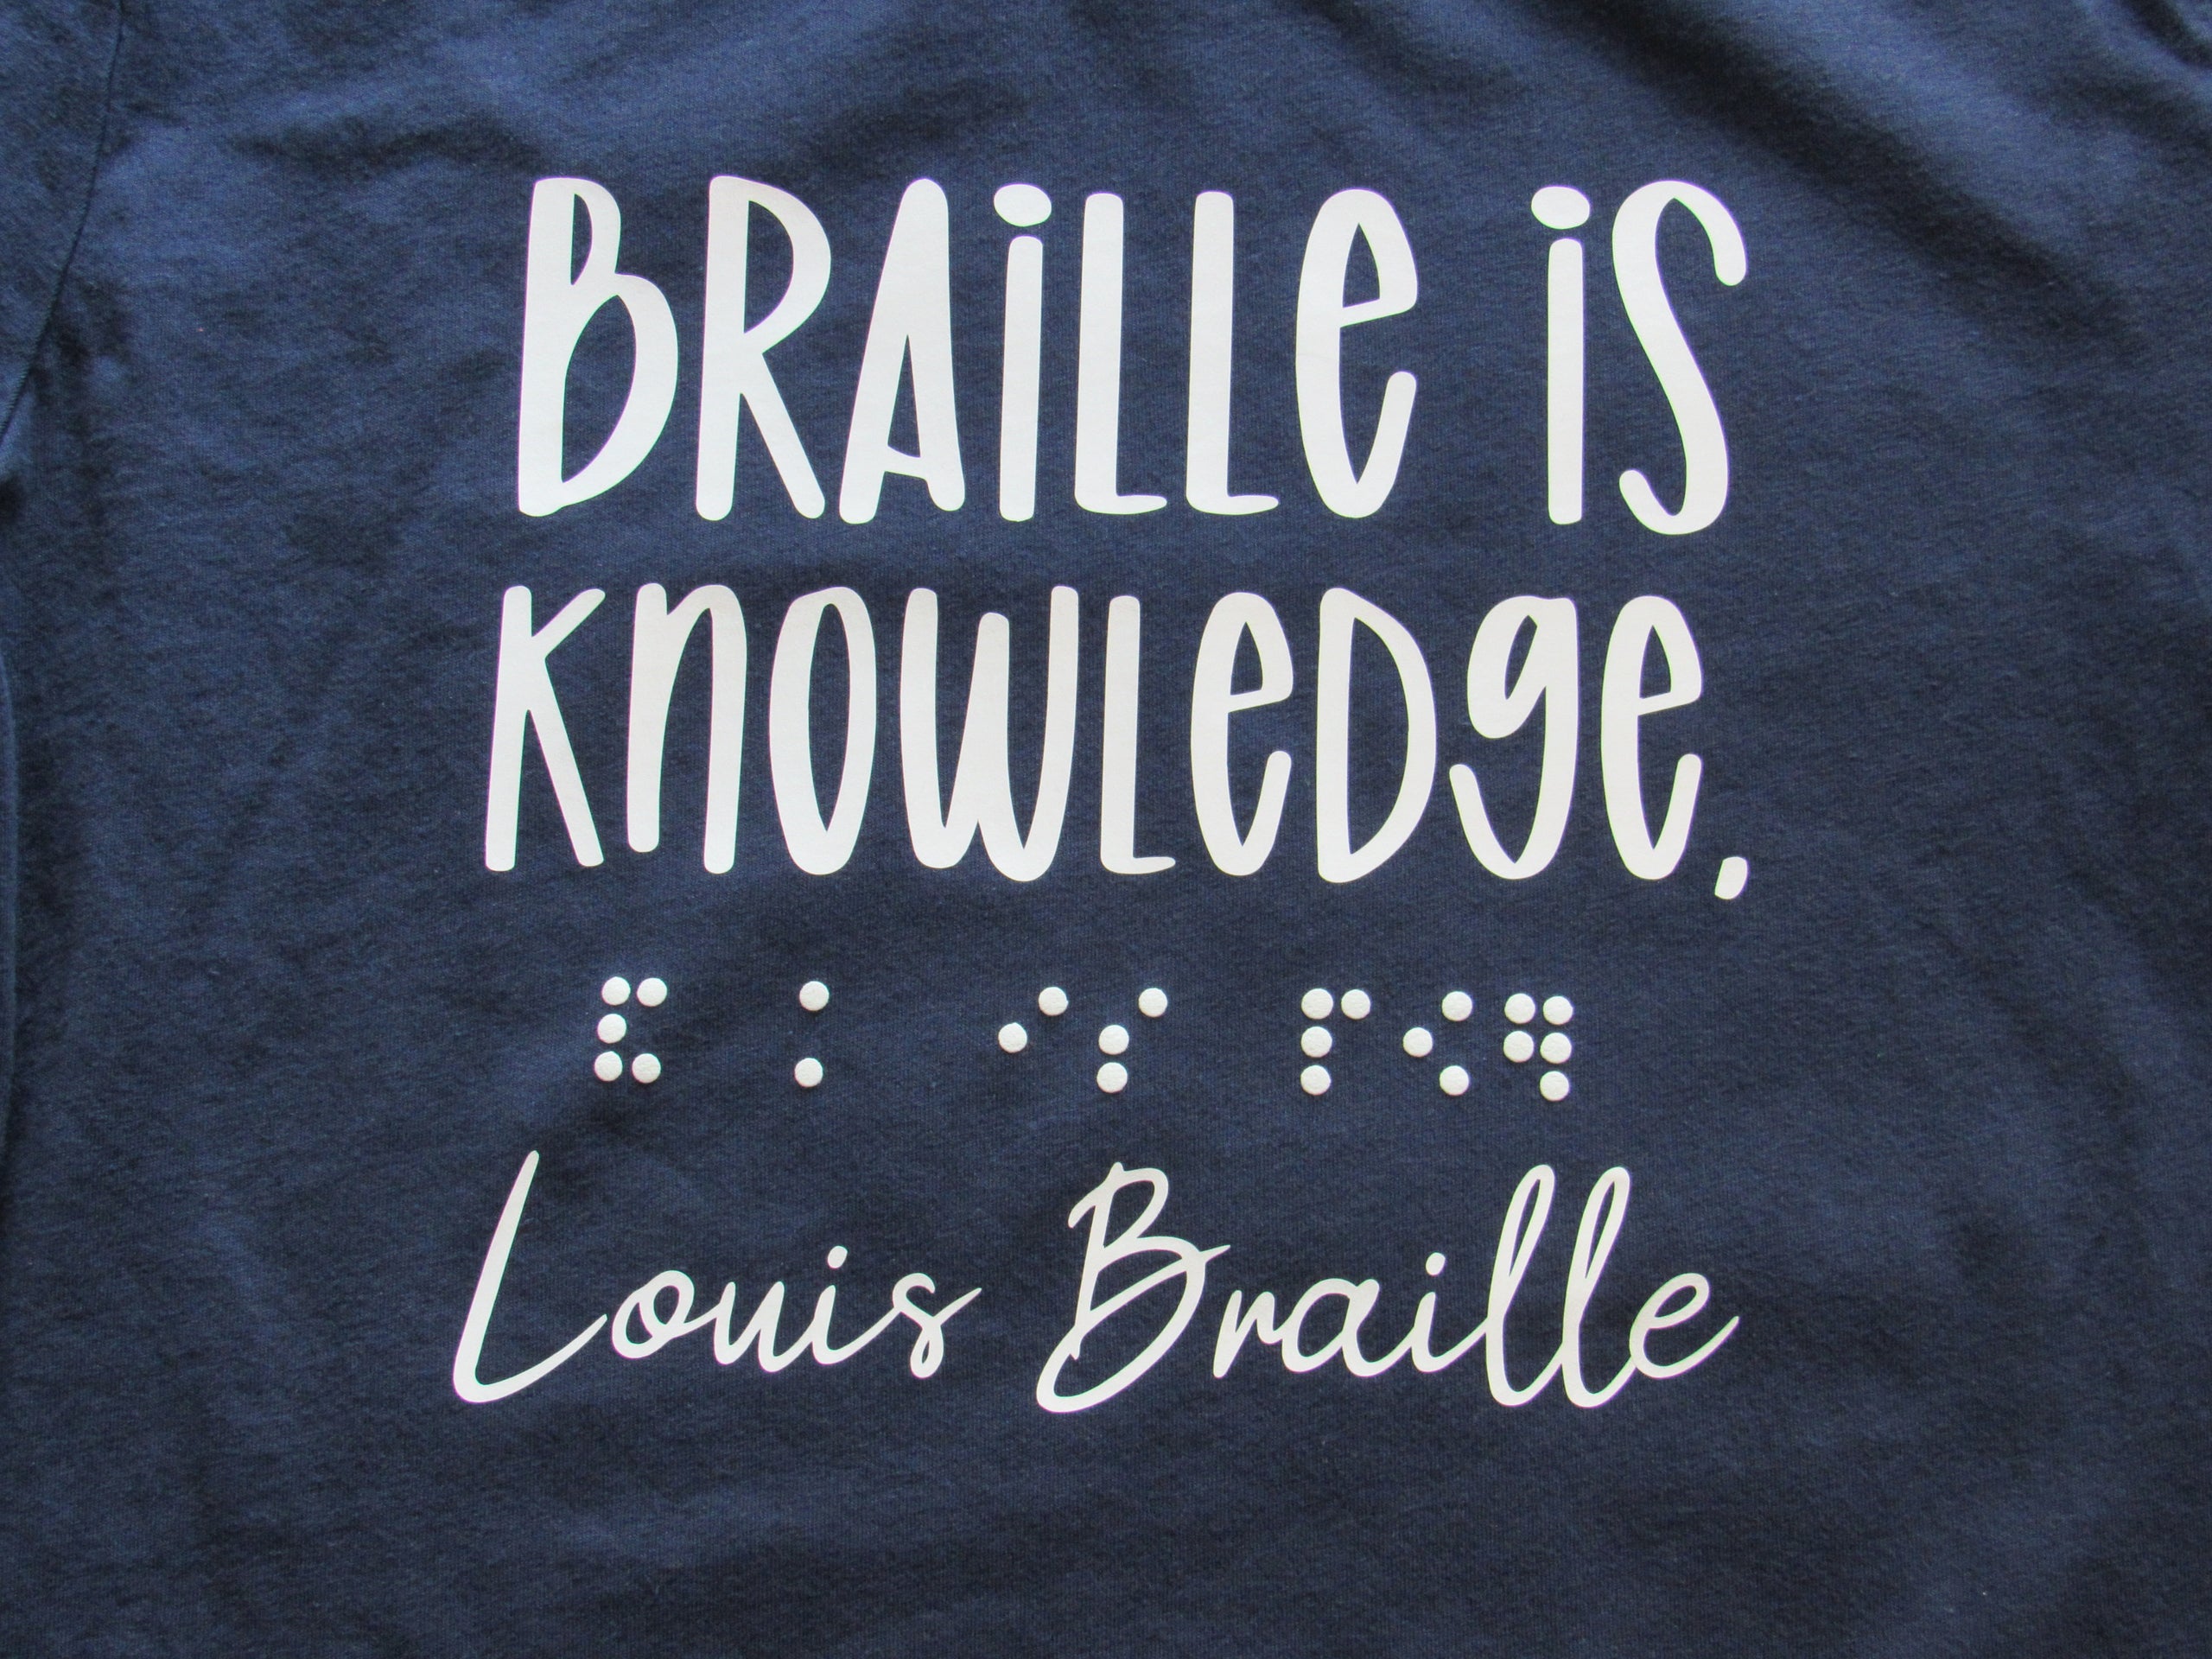 Finde på smid væk endnu engang Braille is Knowledge Louis Braille quote T-shirt